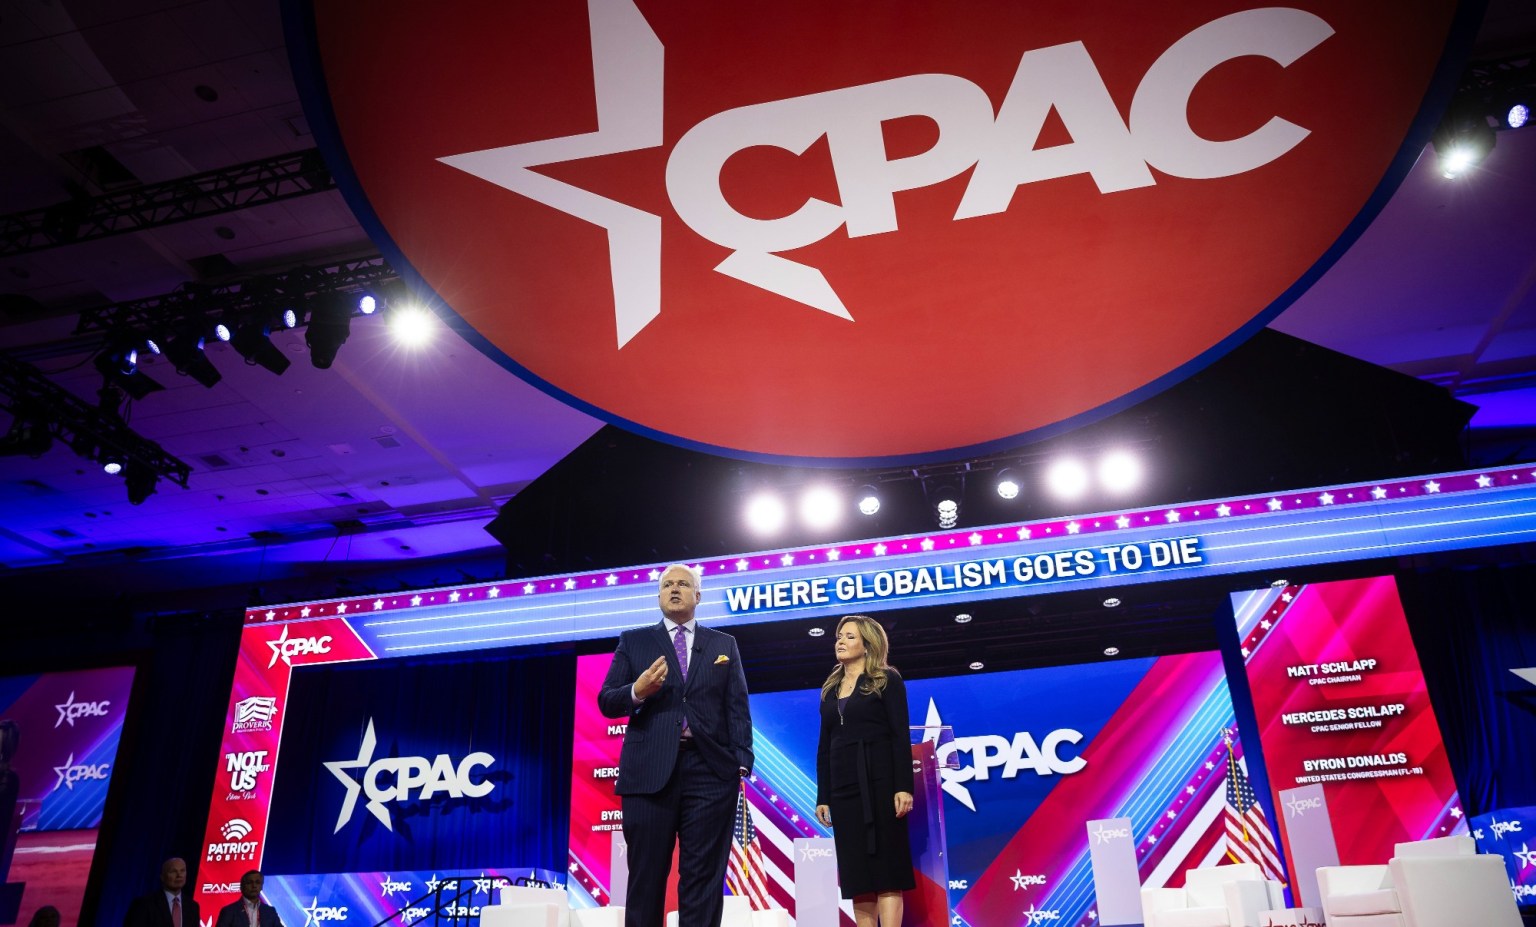 Being Denied a Press Pass at CPAC Was the Best Way to Cover the Conference (motherjones.com)